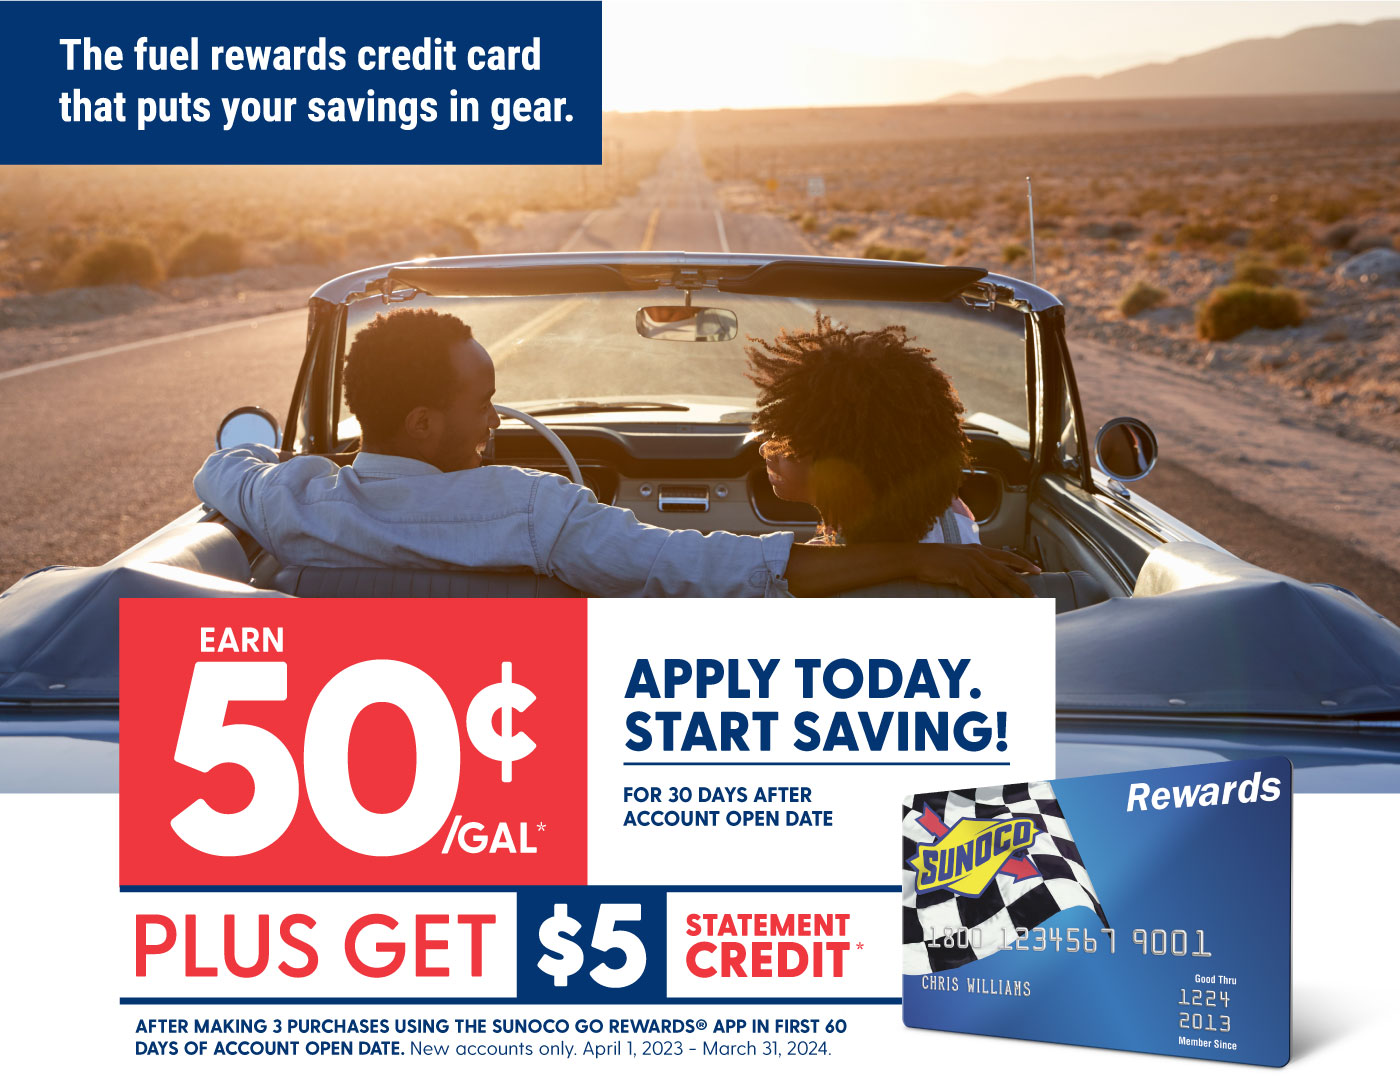 Apply today. Start Saving! Earn 50 cents per gallon for 30 days after account open date. Limited time offer.